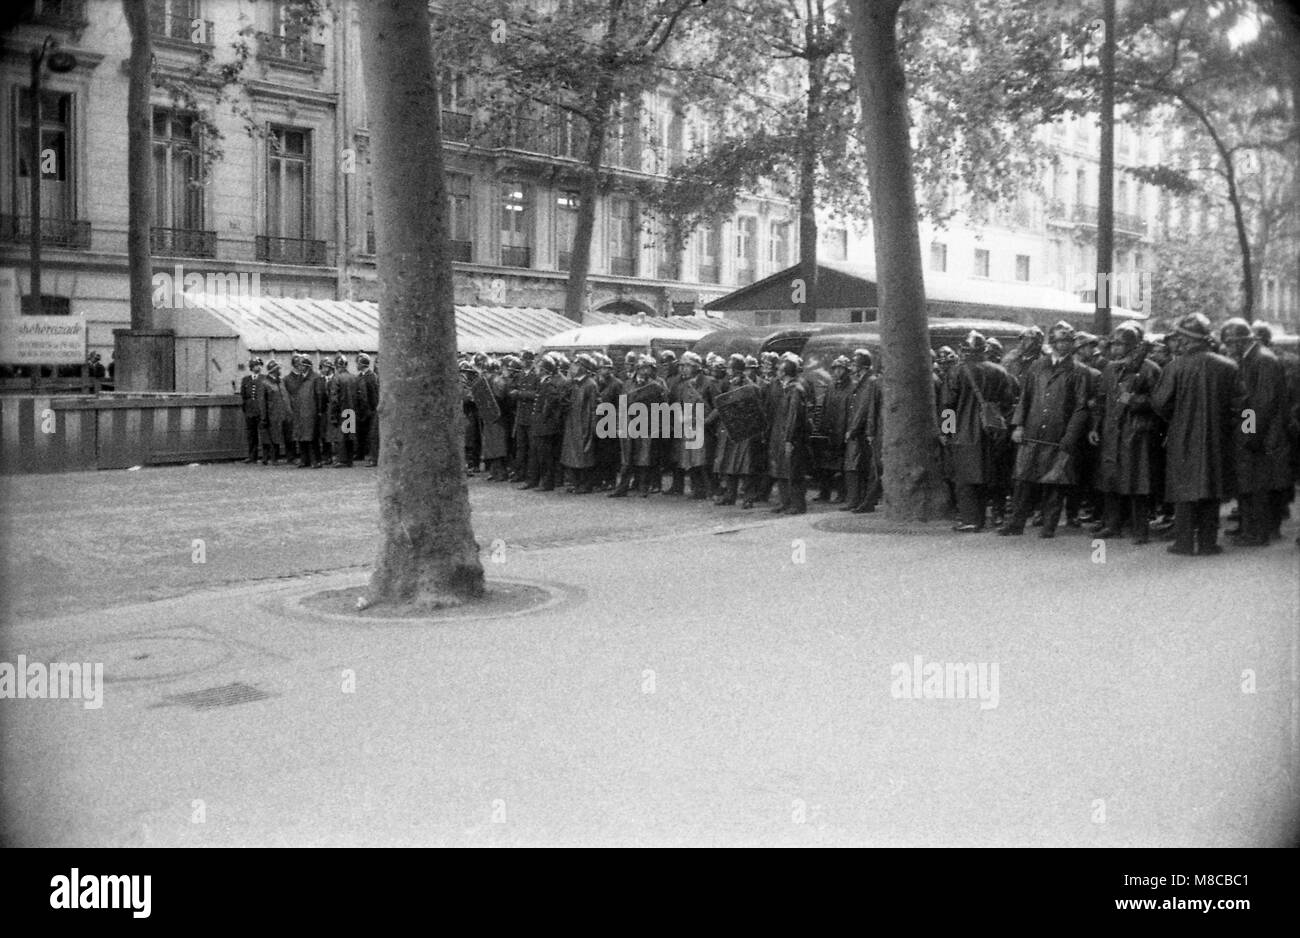 Philippe Gras / Le Pictorium -  May 68 -  1968  -  France / Ile-de-France (region) / Paris  -  A police wall is waiting for protesters Stock Photo